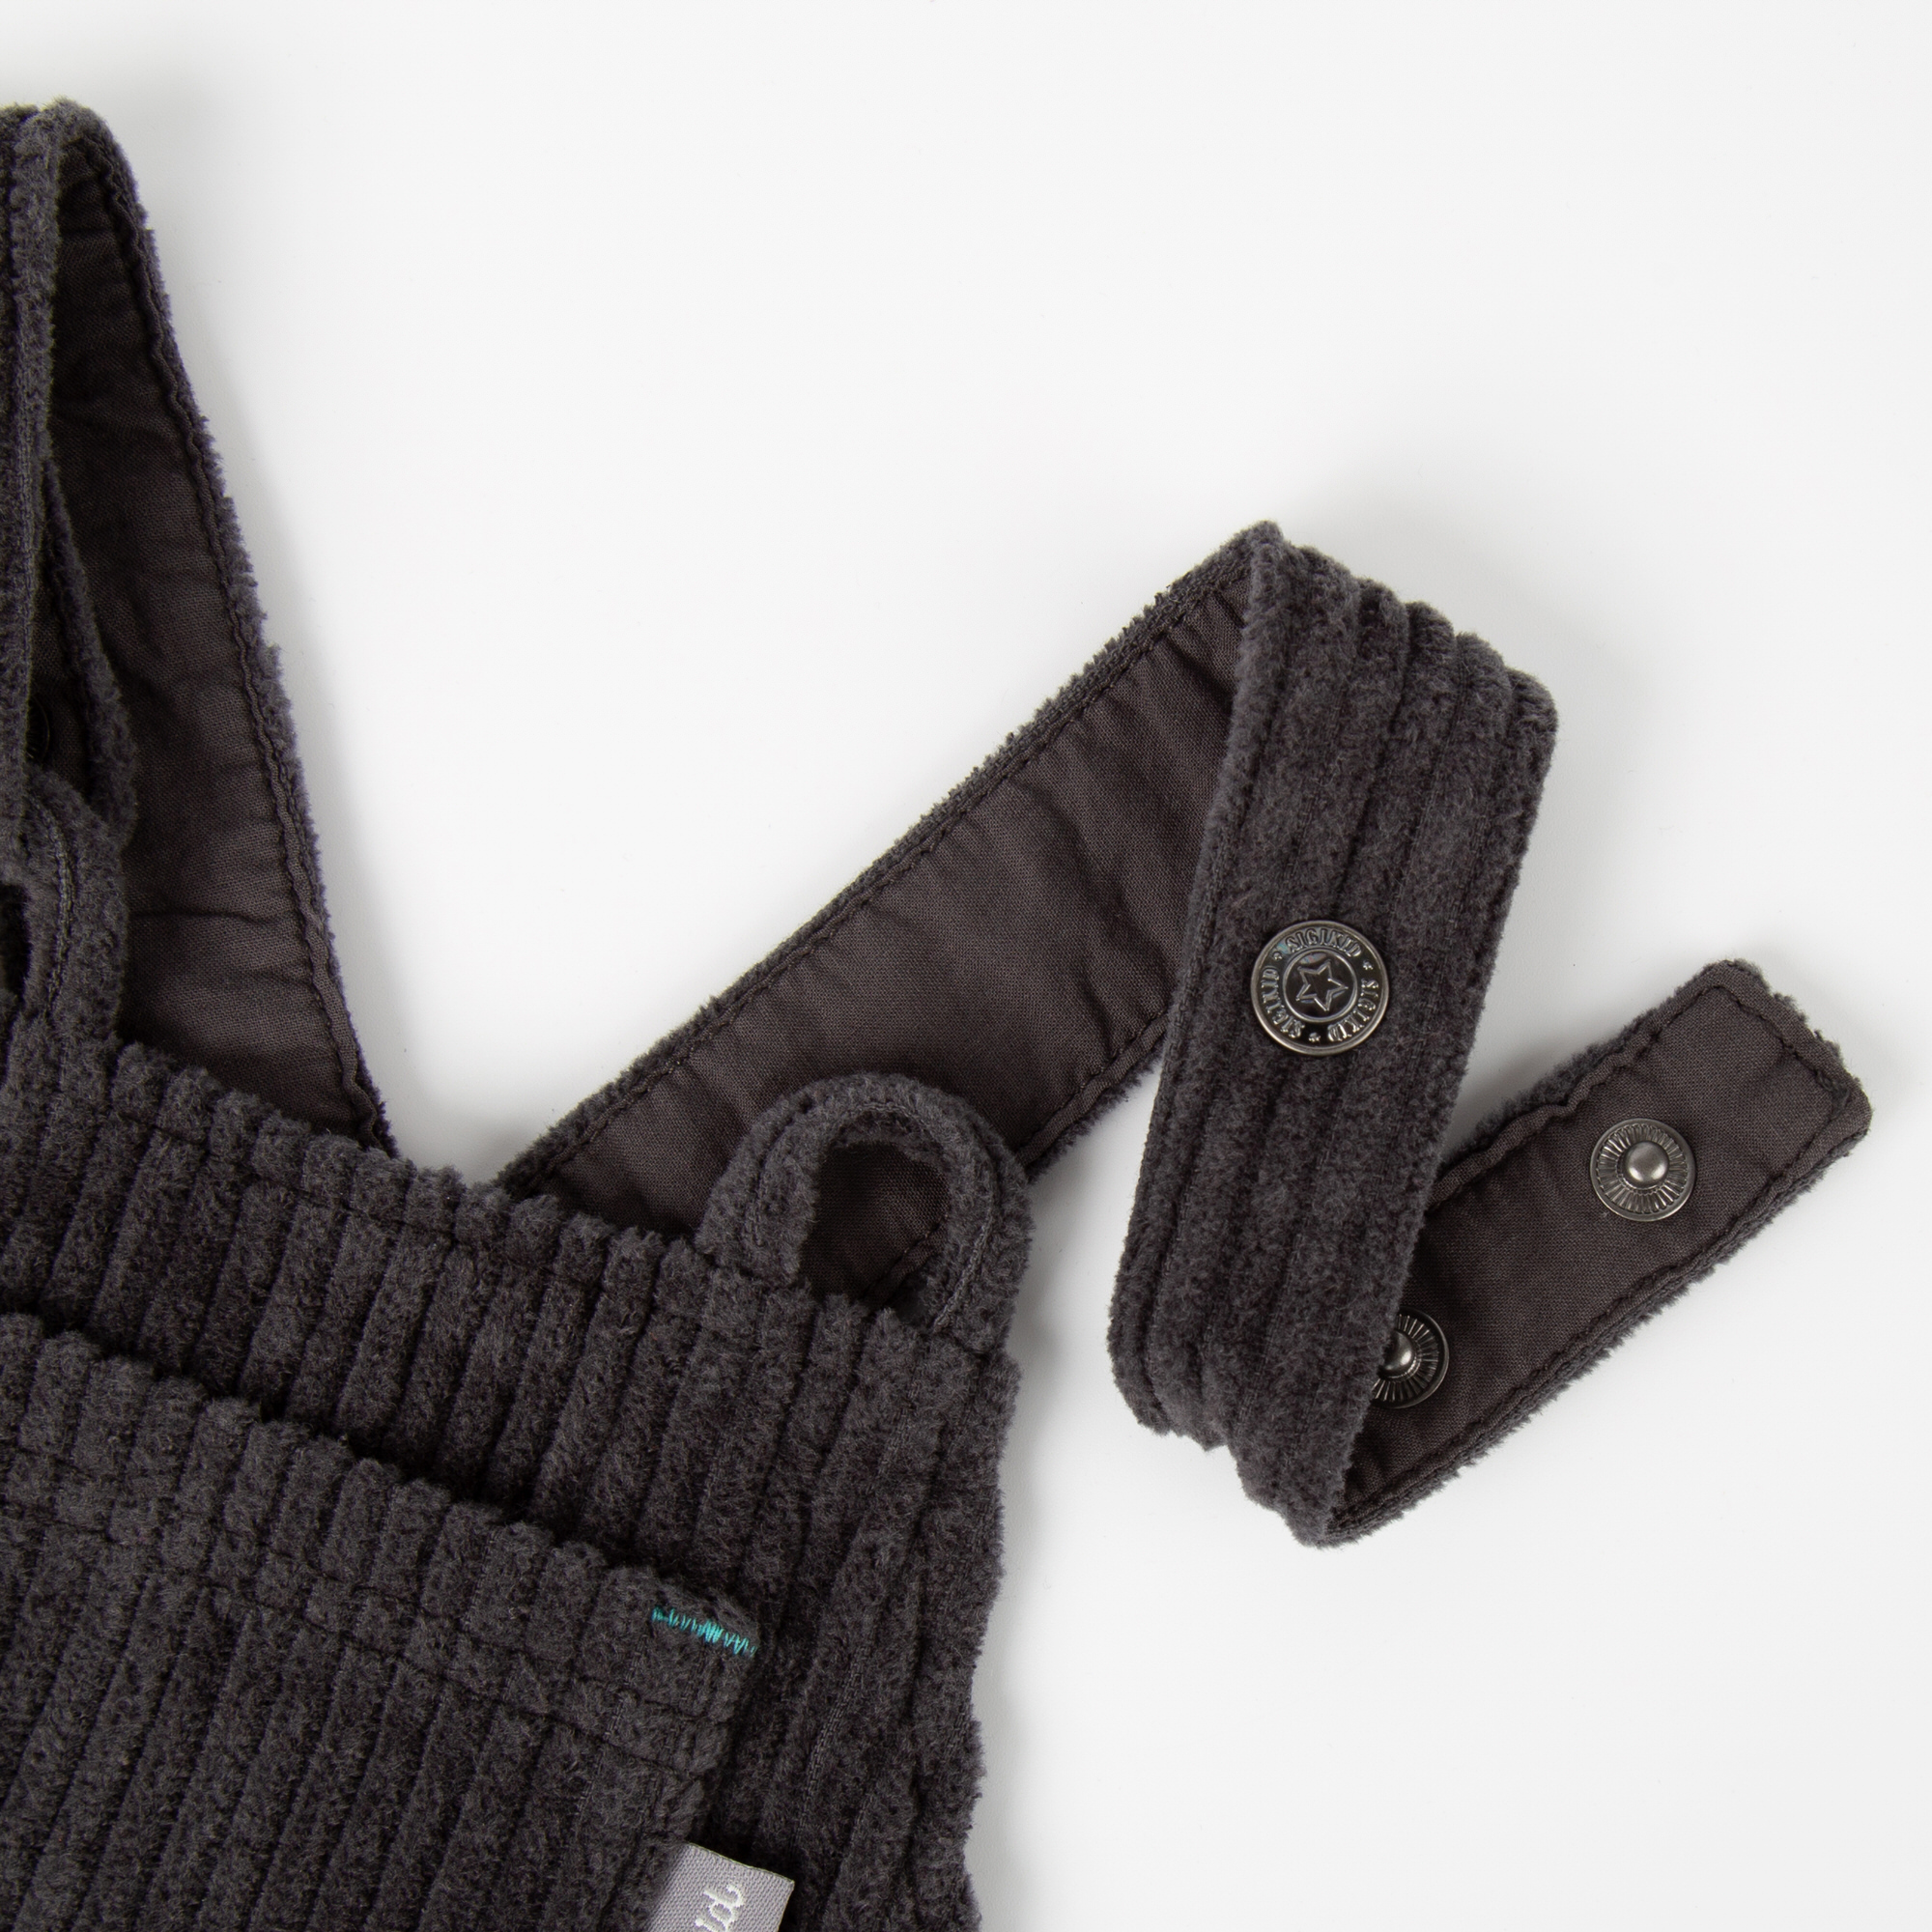 Corduroy baby dungarees with pockets, dark grey